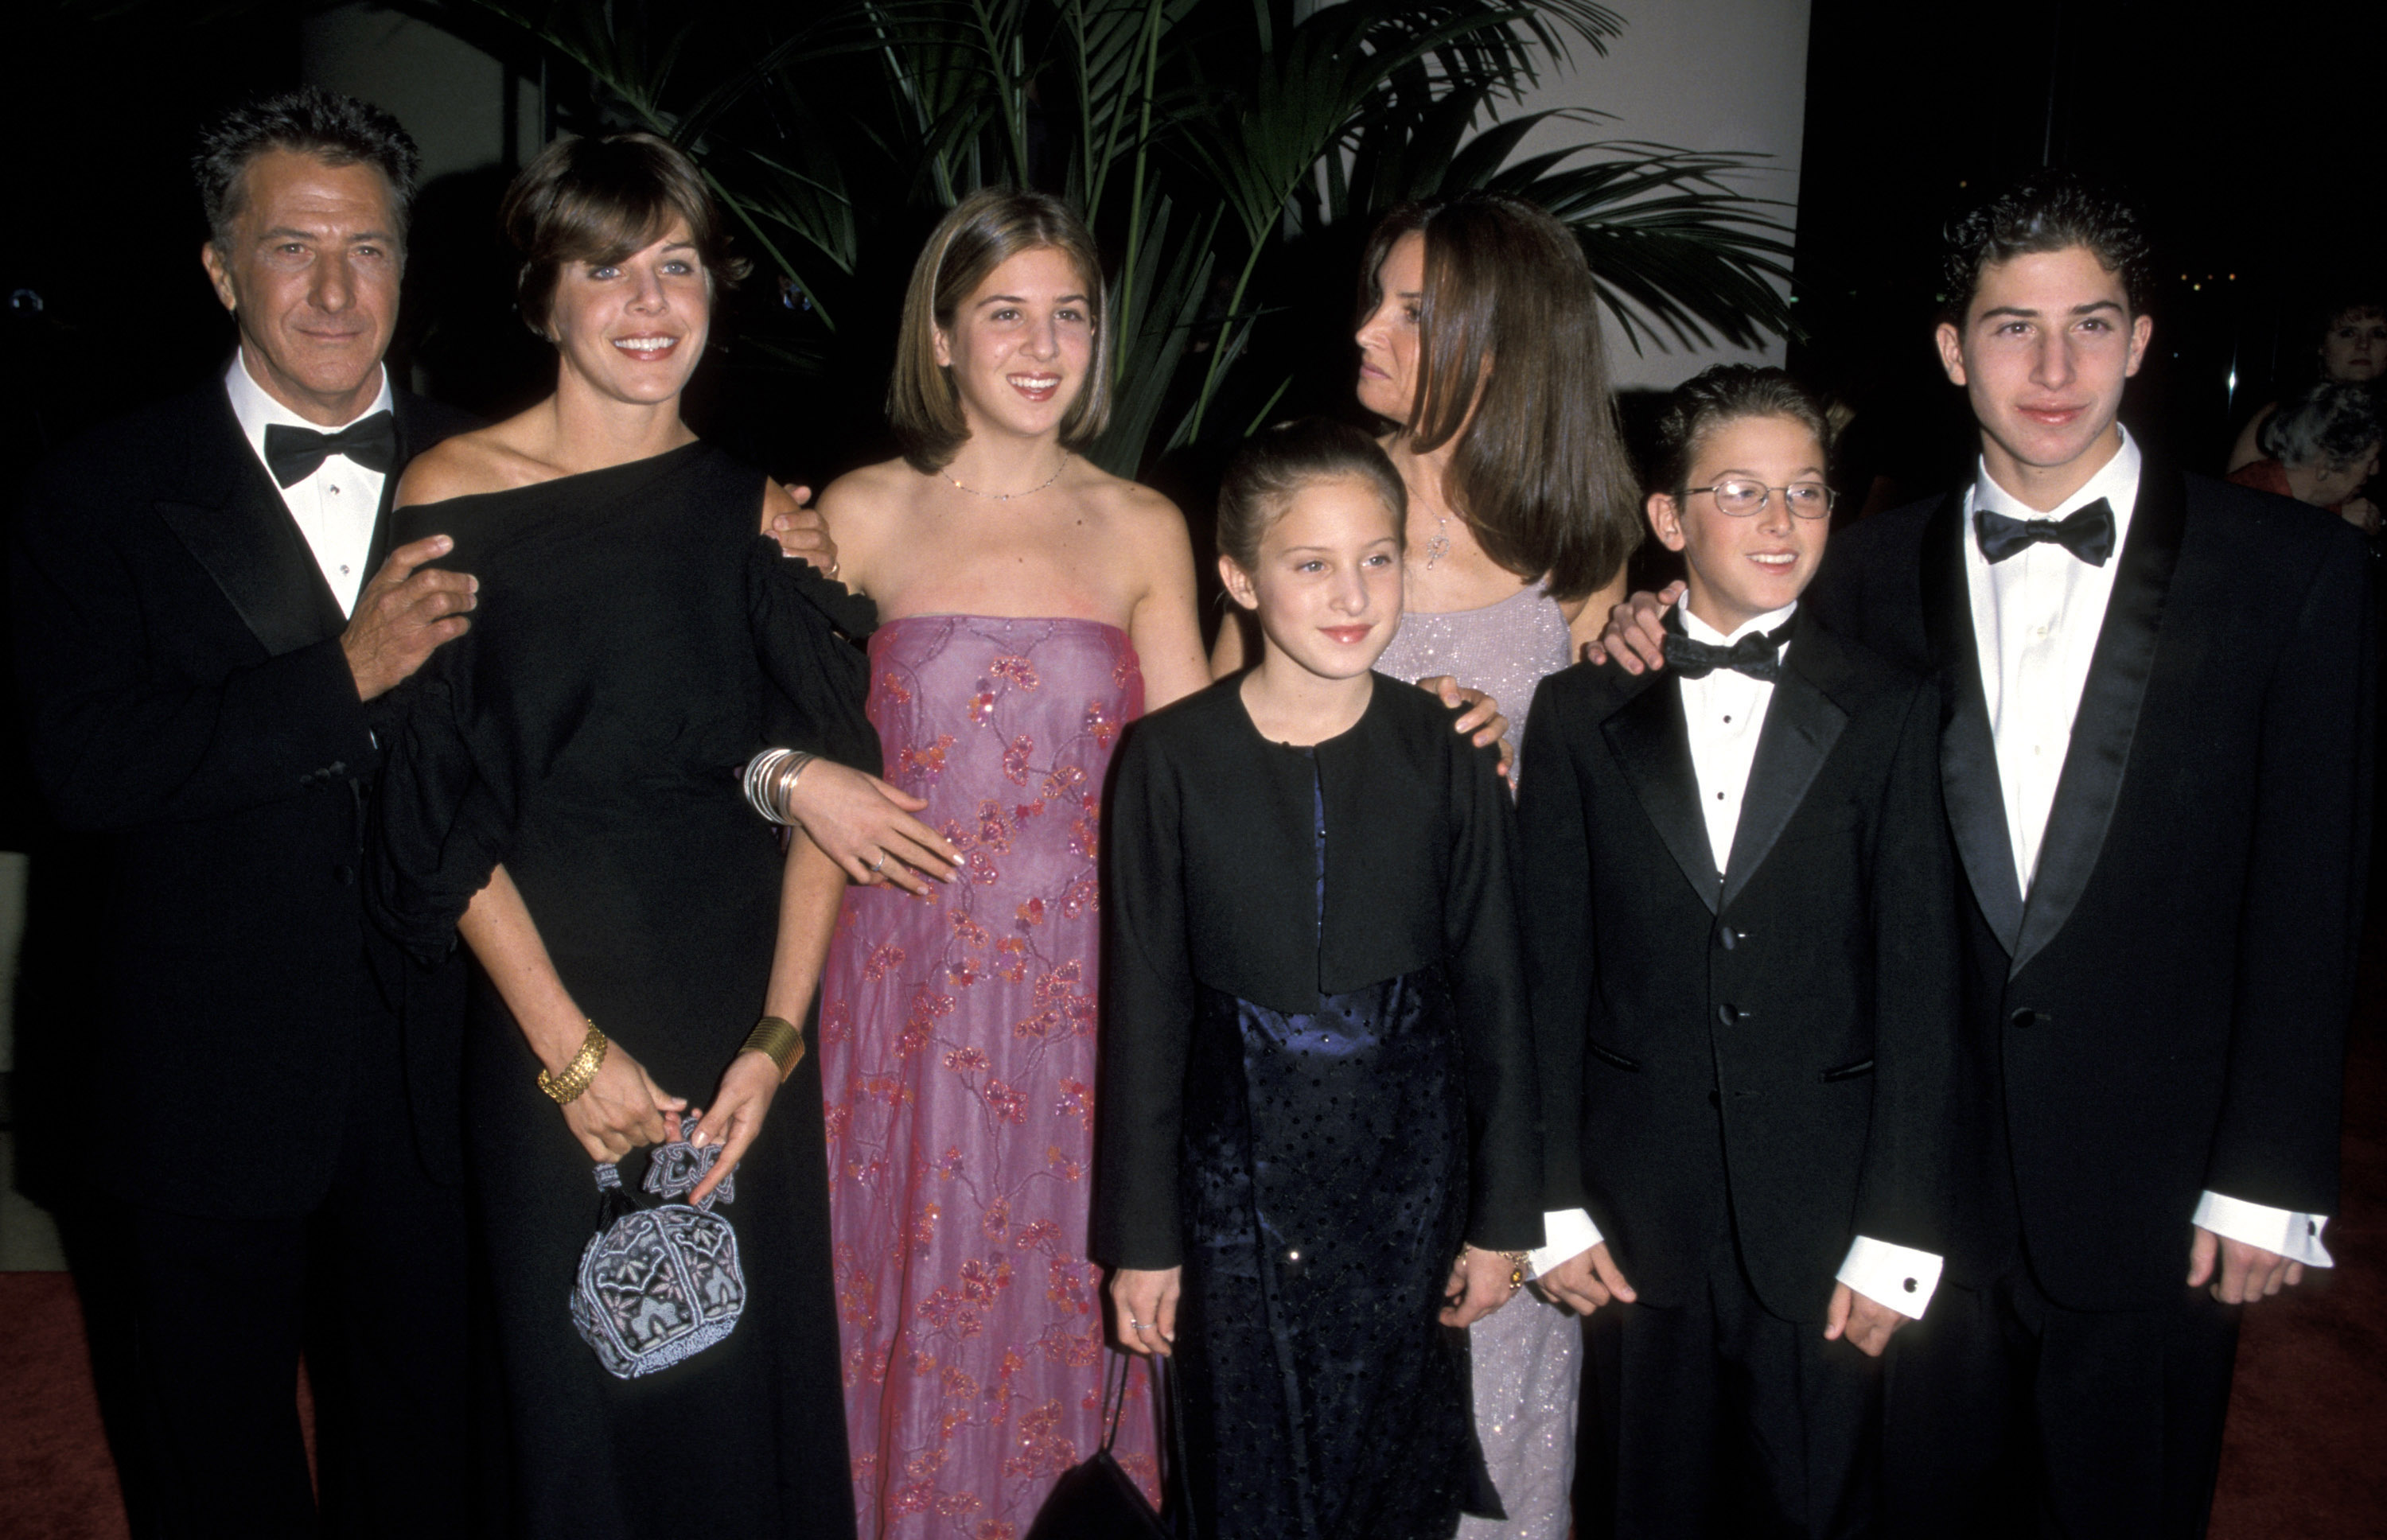 The woman, the actor, and their children during the American Film Institute Honors Dustin Hoffman with Life Achievement Award in Beverly Hills, California on February 18, 1999. | Source: Getty Images